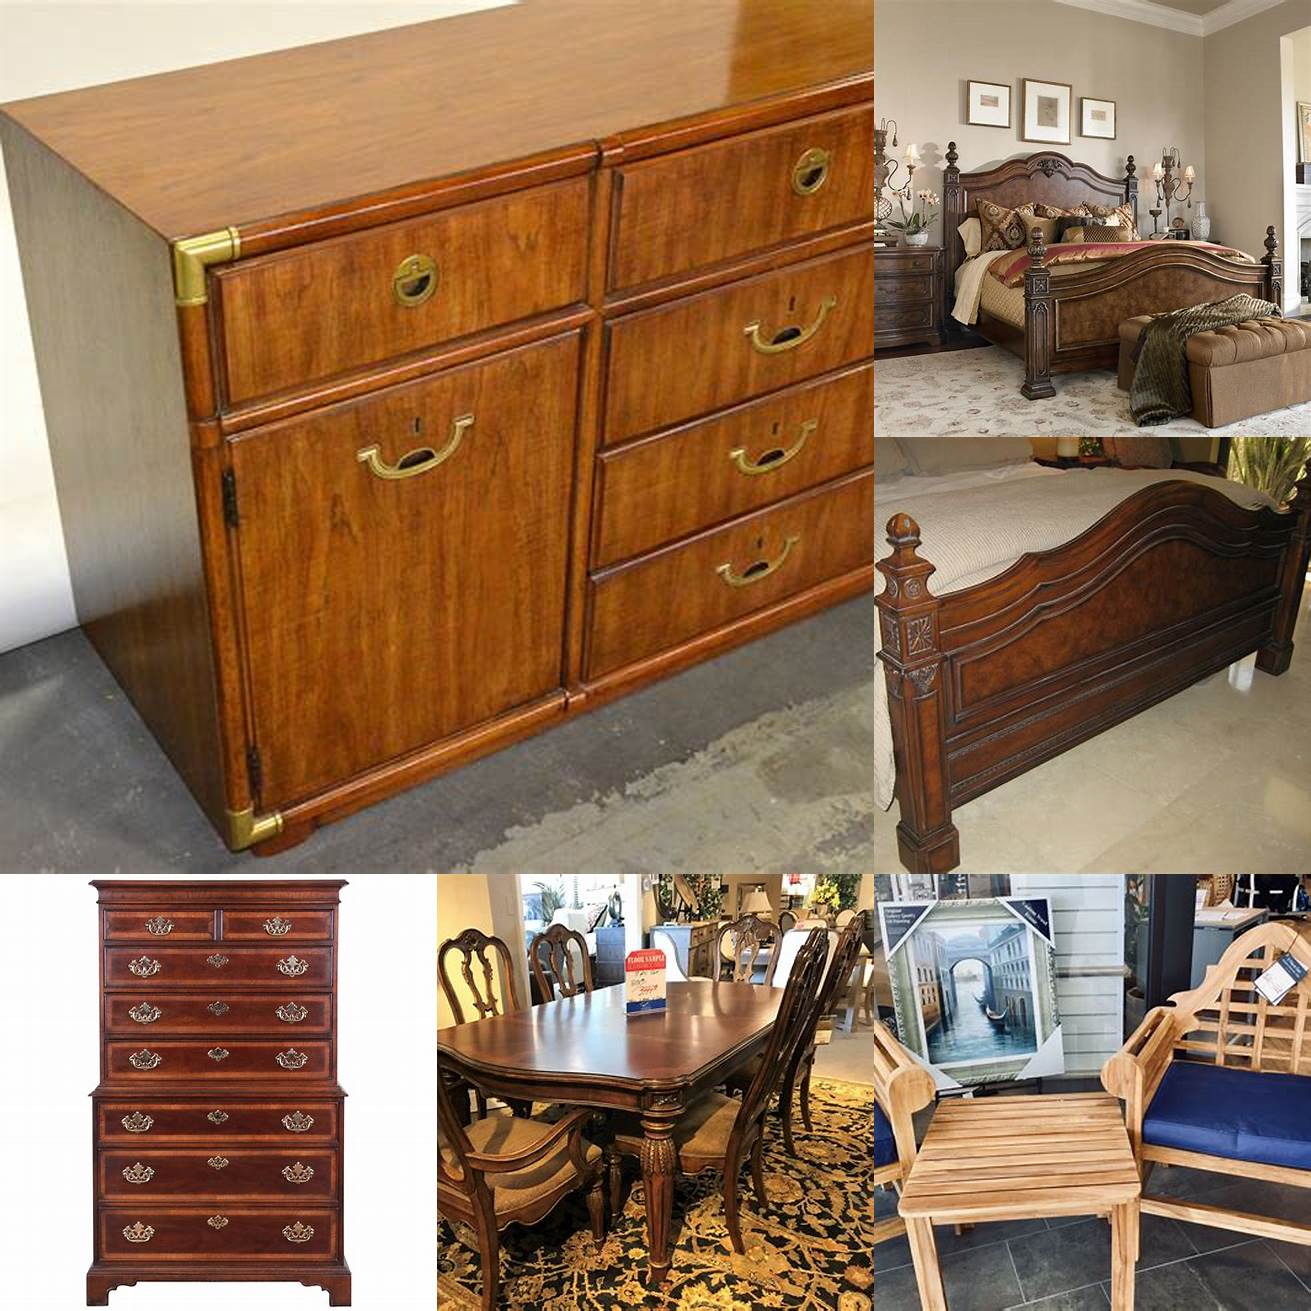 Drexel Heritage teak furniture in a relaxed setting